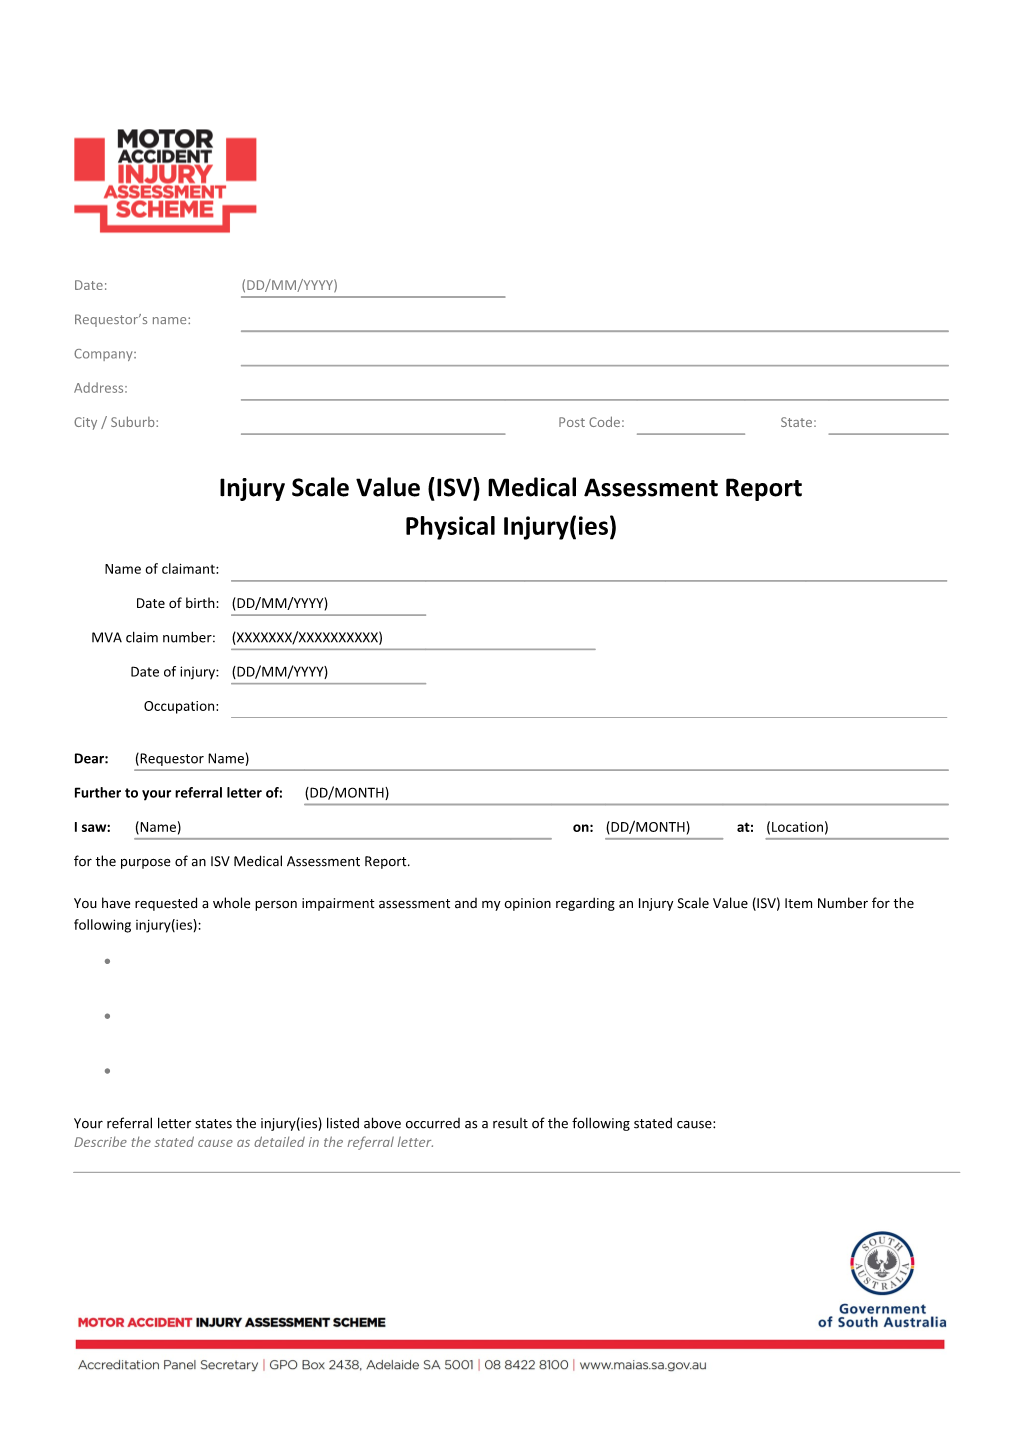 Injury Scale Value (ISV) Medical Assessment Report